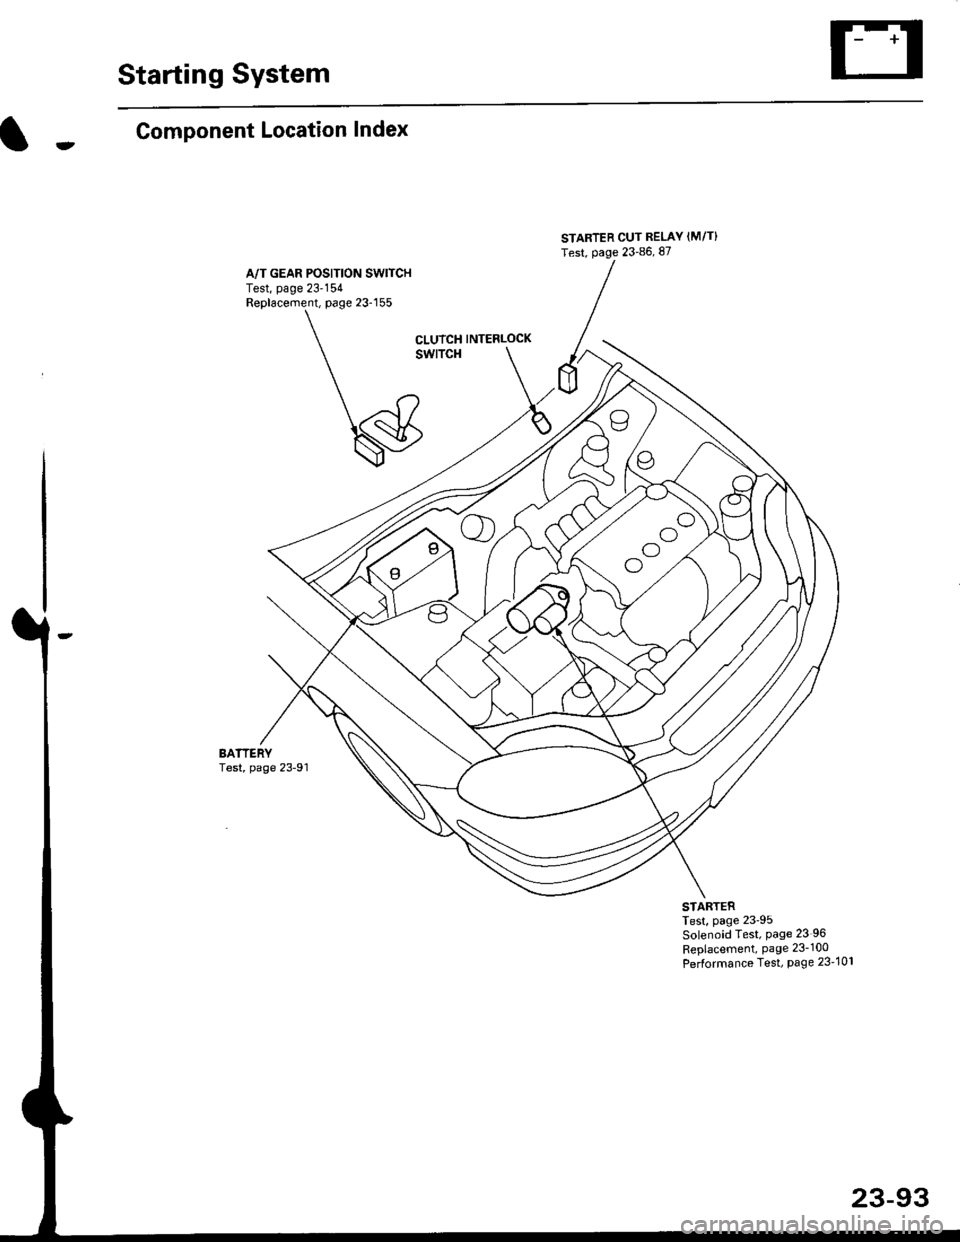 HONDA CIVIC 1998 6.G Workshop Manual Starting System
Component Location Index
A/T GEAR POSITION SW|TCHTest, page 23154Replacement, page 23-155
STARTER CUT RELAY (M/T}
Test, page 23-86, 87
oo
ool
CLUTCH INTERLOCK
swlTcH
BATTERYTest, page